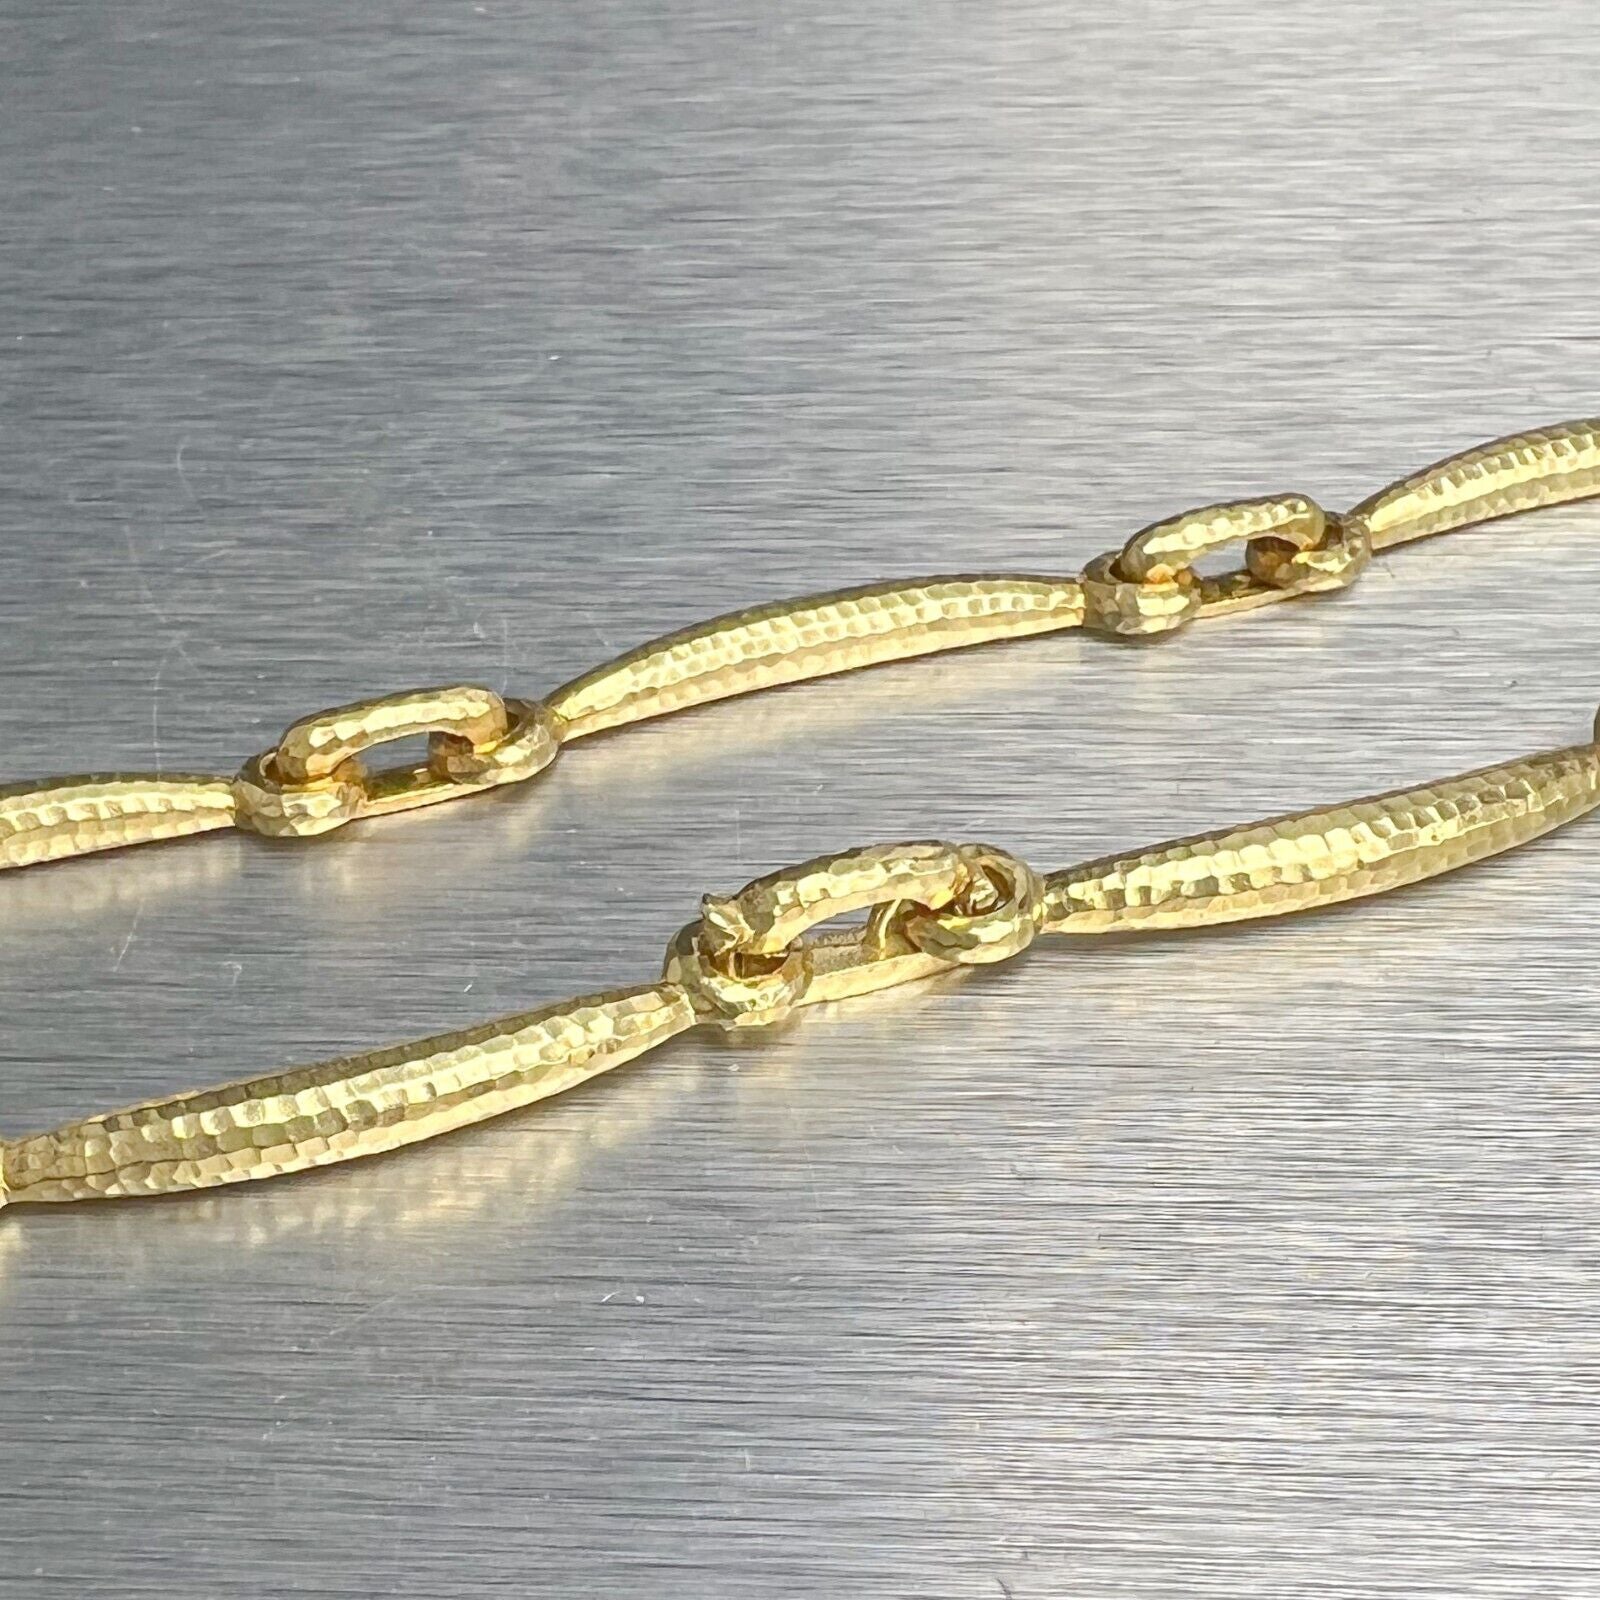 18k Yellow Gold Hammered Bar Link Choker Necklace w/ Extension Link 16" / 18"